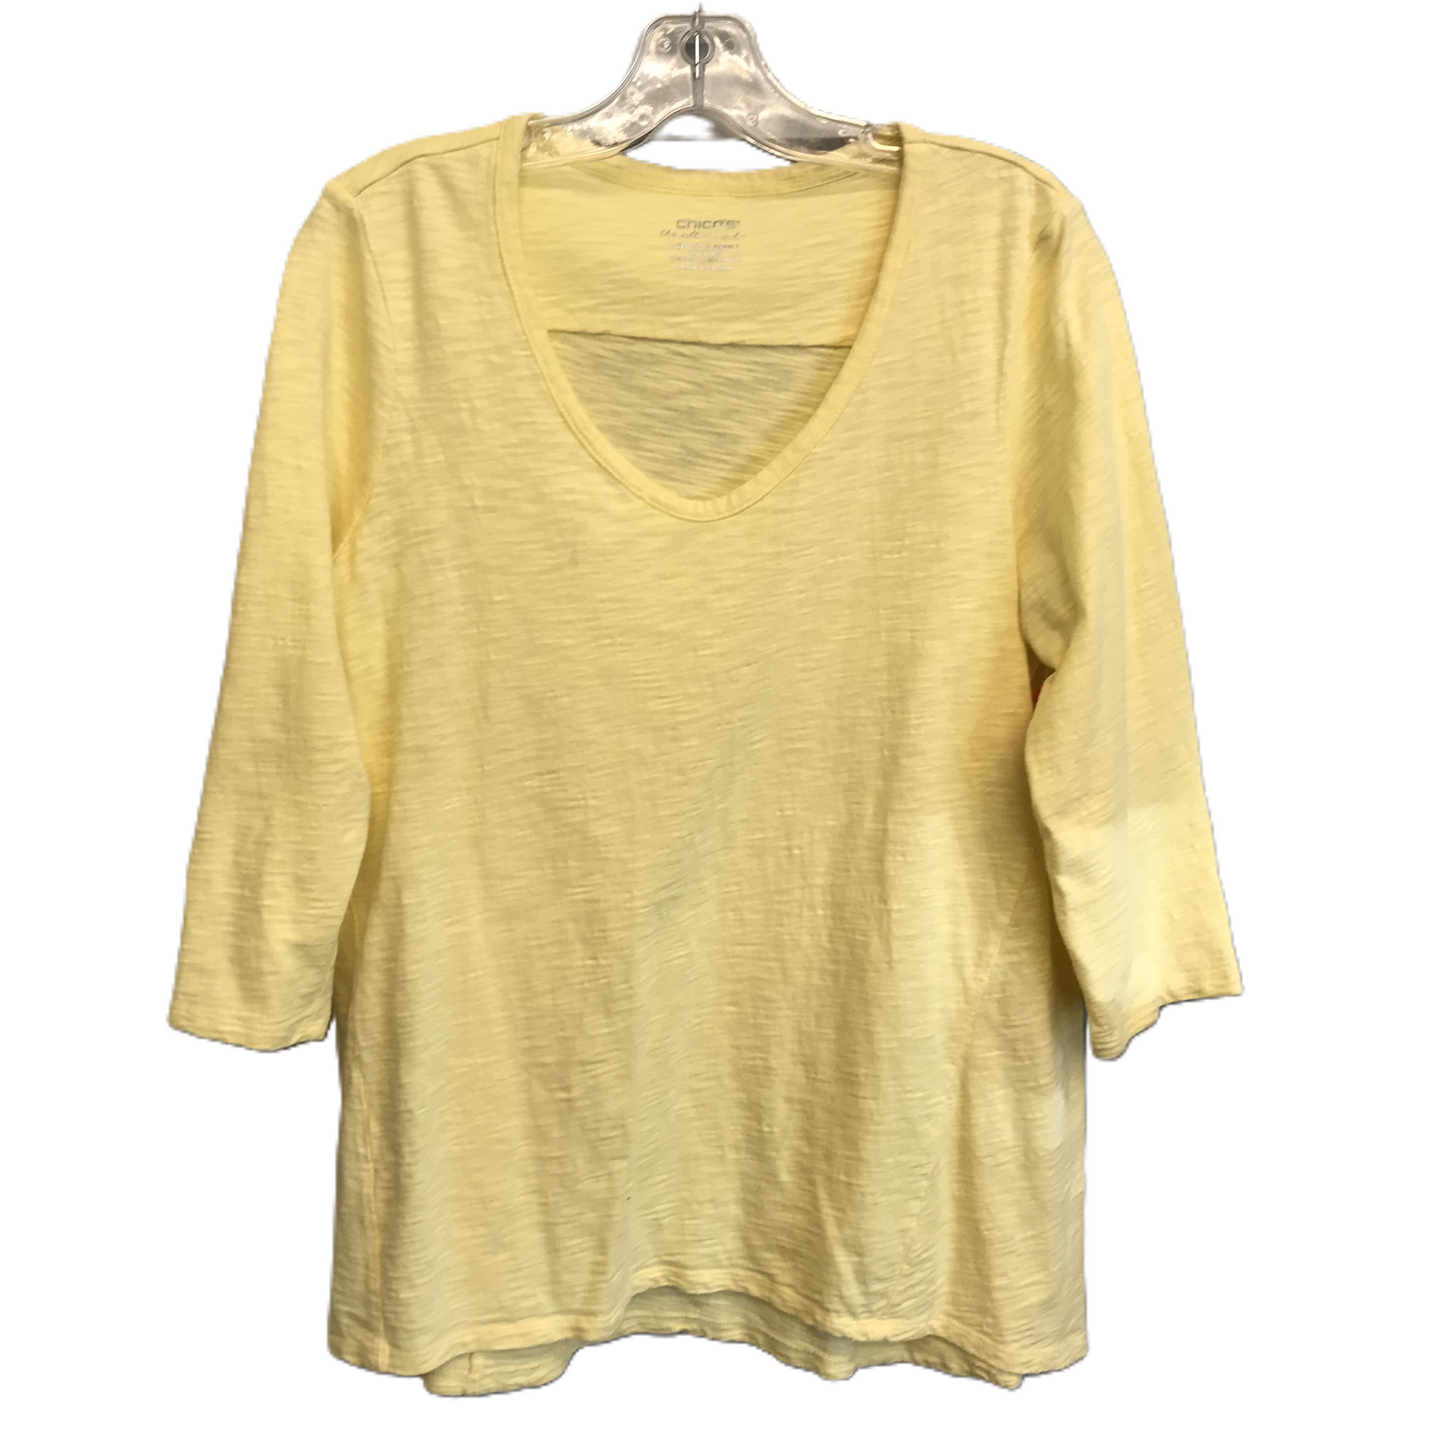 Top Long Sleeve Basic By Chicos  Size: M